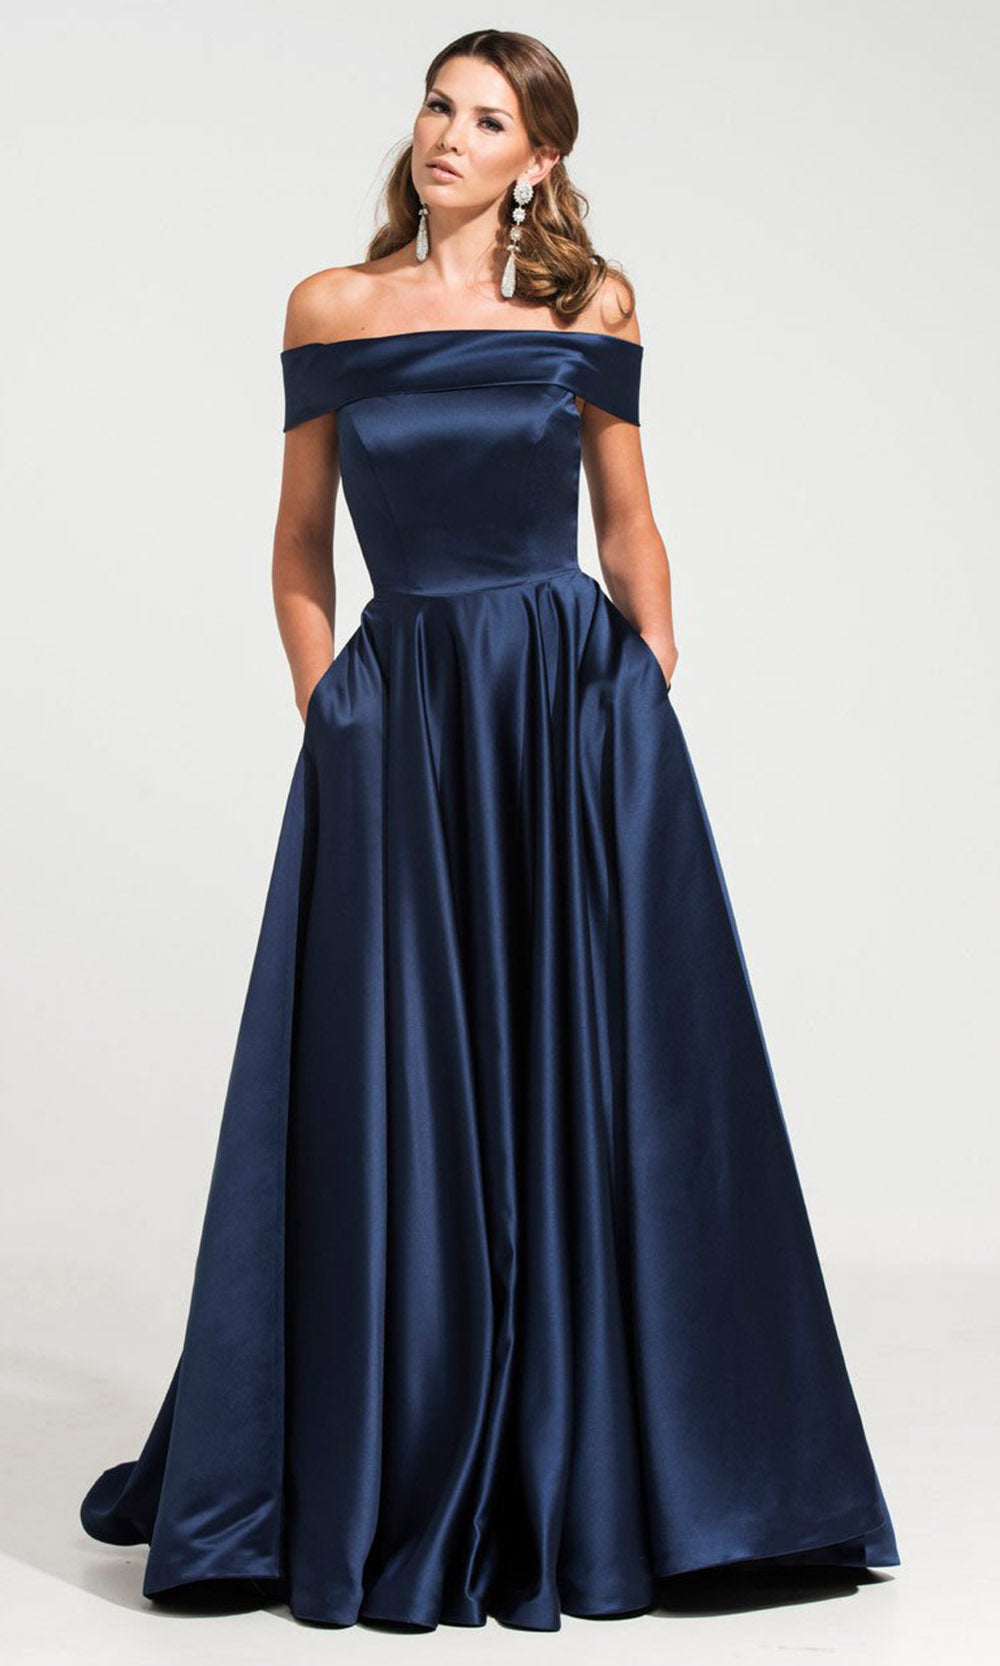 Ashley Lauren - Off Shoulder Pageant Ball Gown 1139 - 1 pc Navy In Size 4 Available CCSALE 4 / Navy